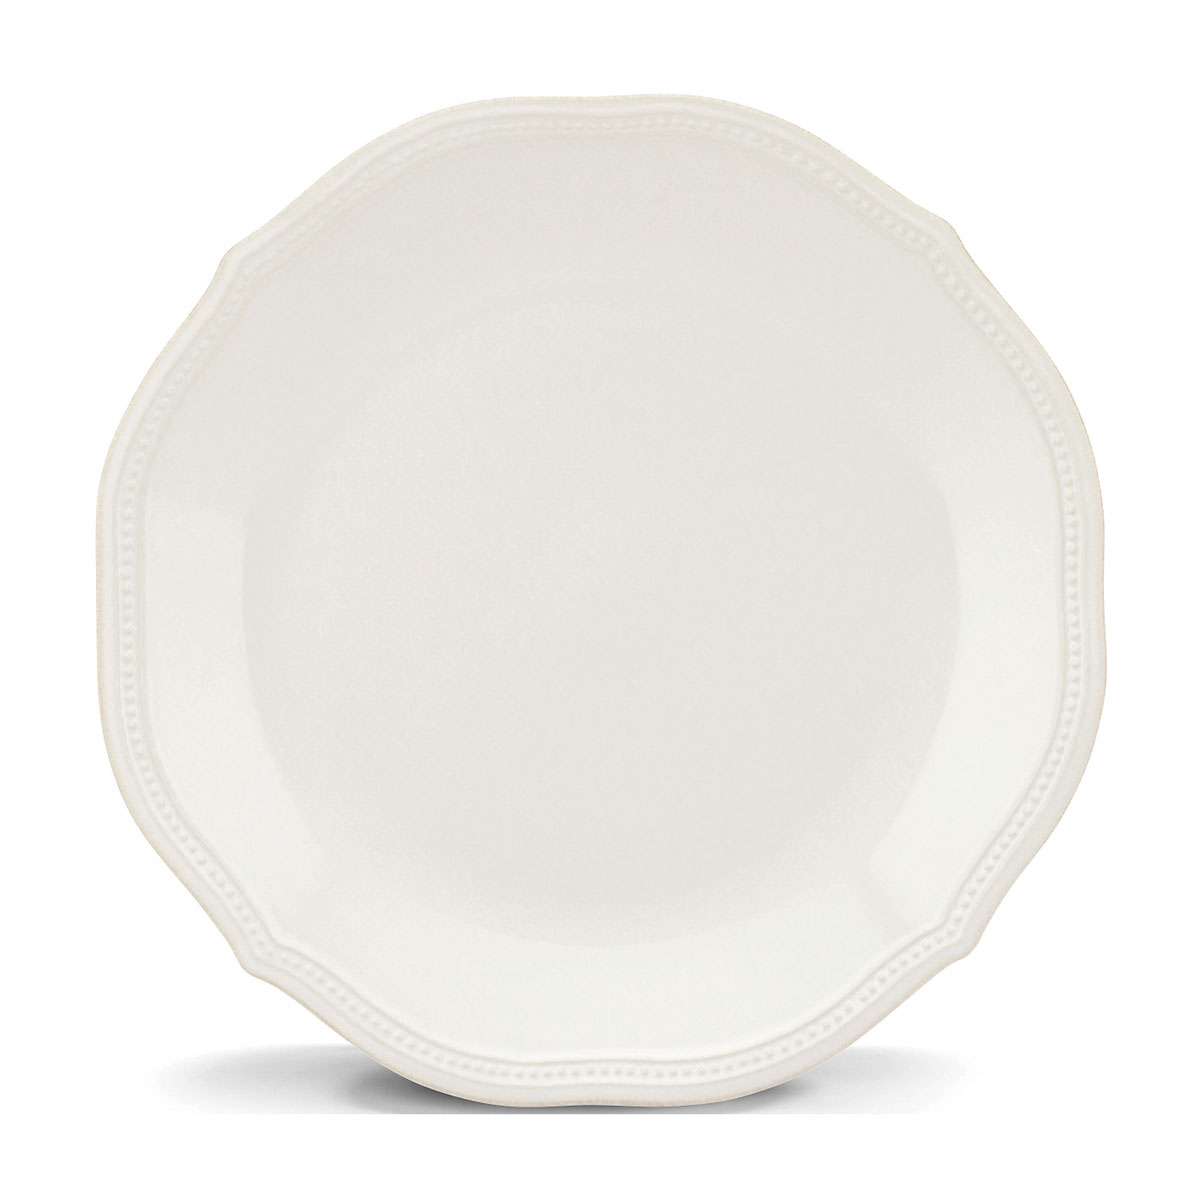 Lenox French Perle Bead White China Dinner Plate, Single